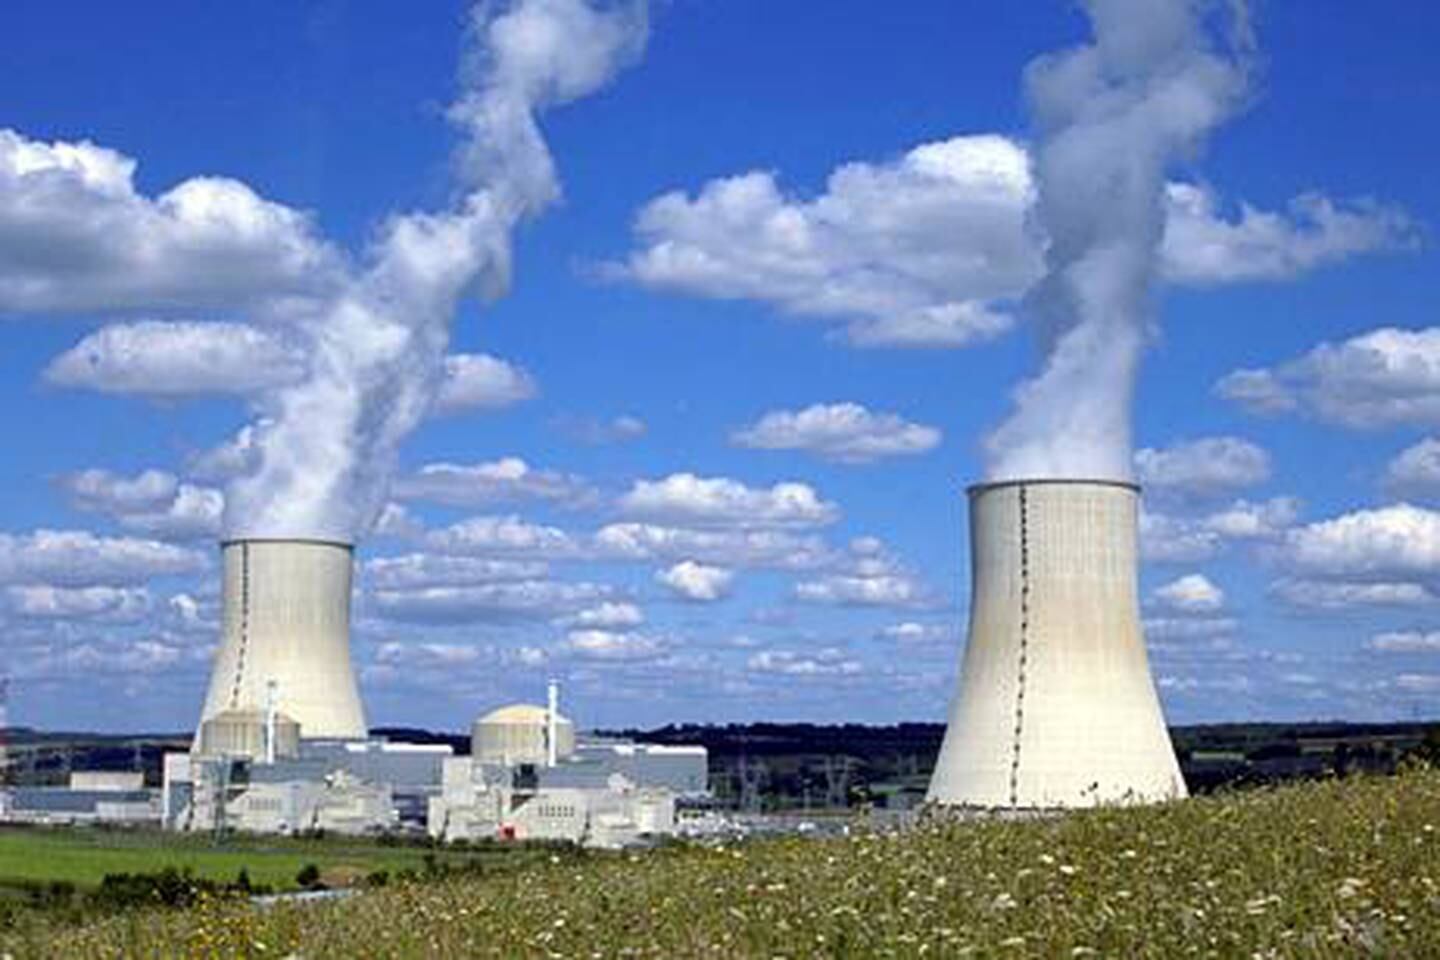 This is an undated company photo of the Areva-constructed nuclear power plant at Civaux, France. France said it will sell more than a third of Areva SA, the world's biggest maker of nuclear reactors, raising as much as 3.5 billion euros ($4.5 billion) in an initial public offering. Source: Areva via Bloomberg News.